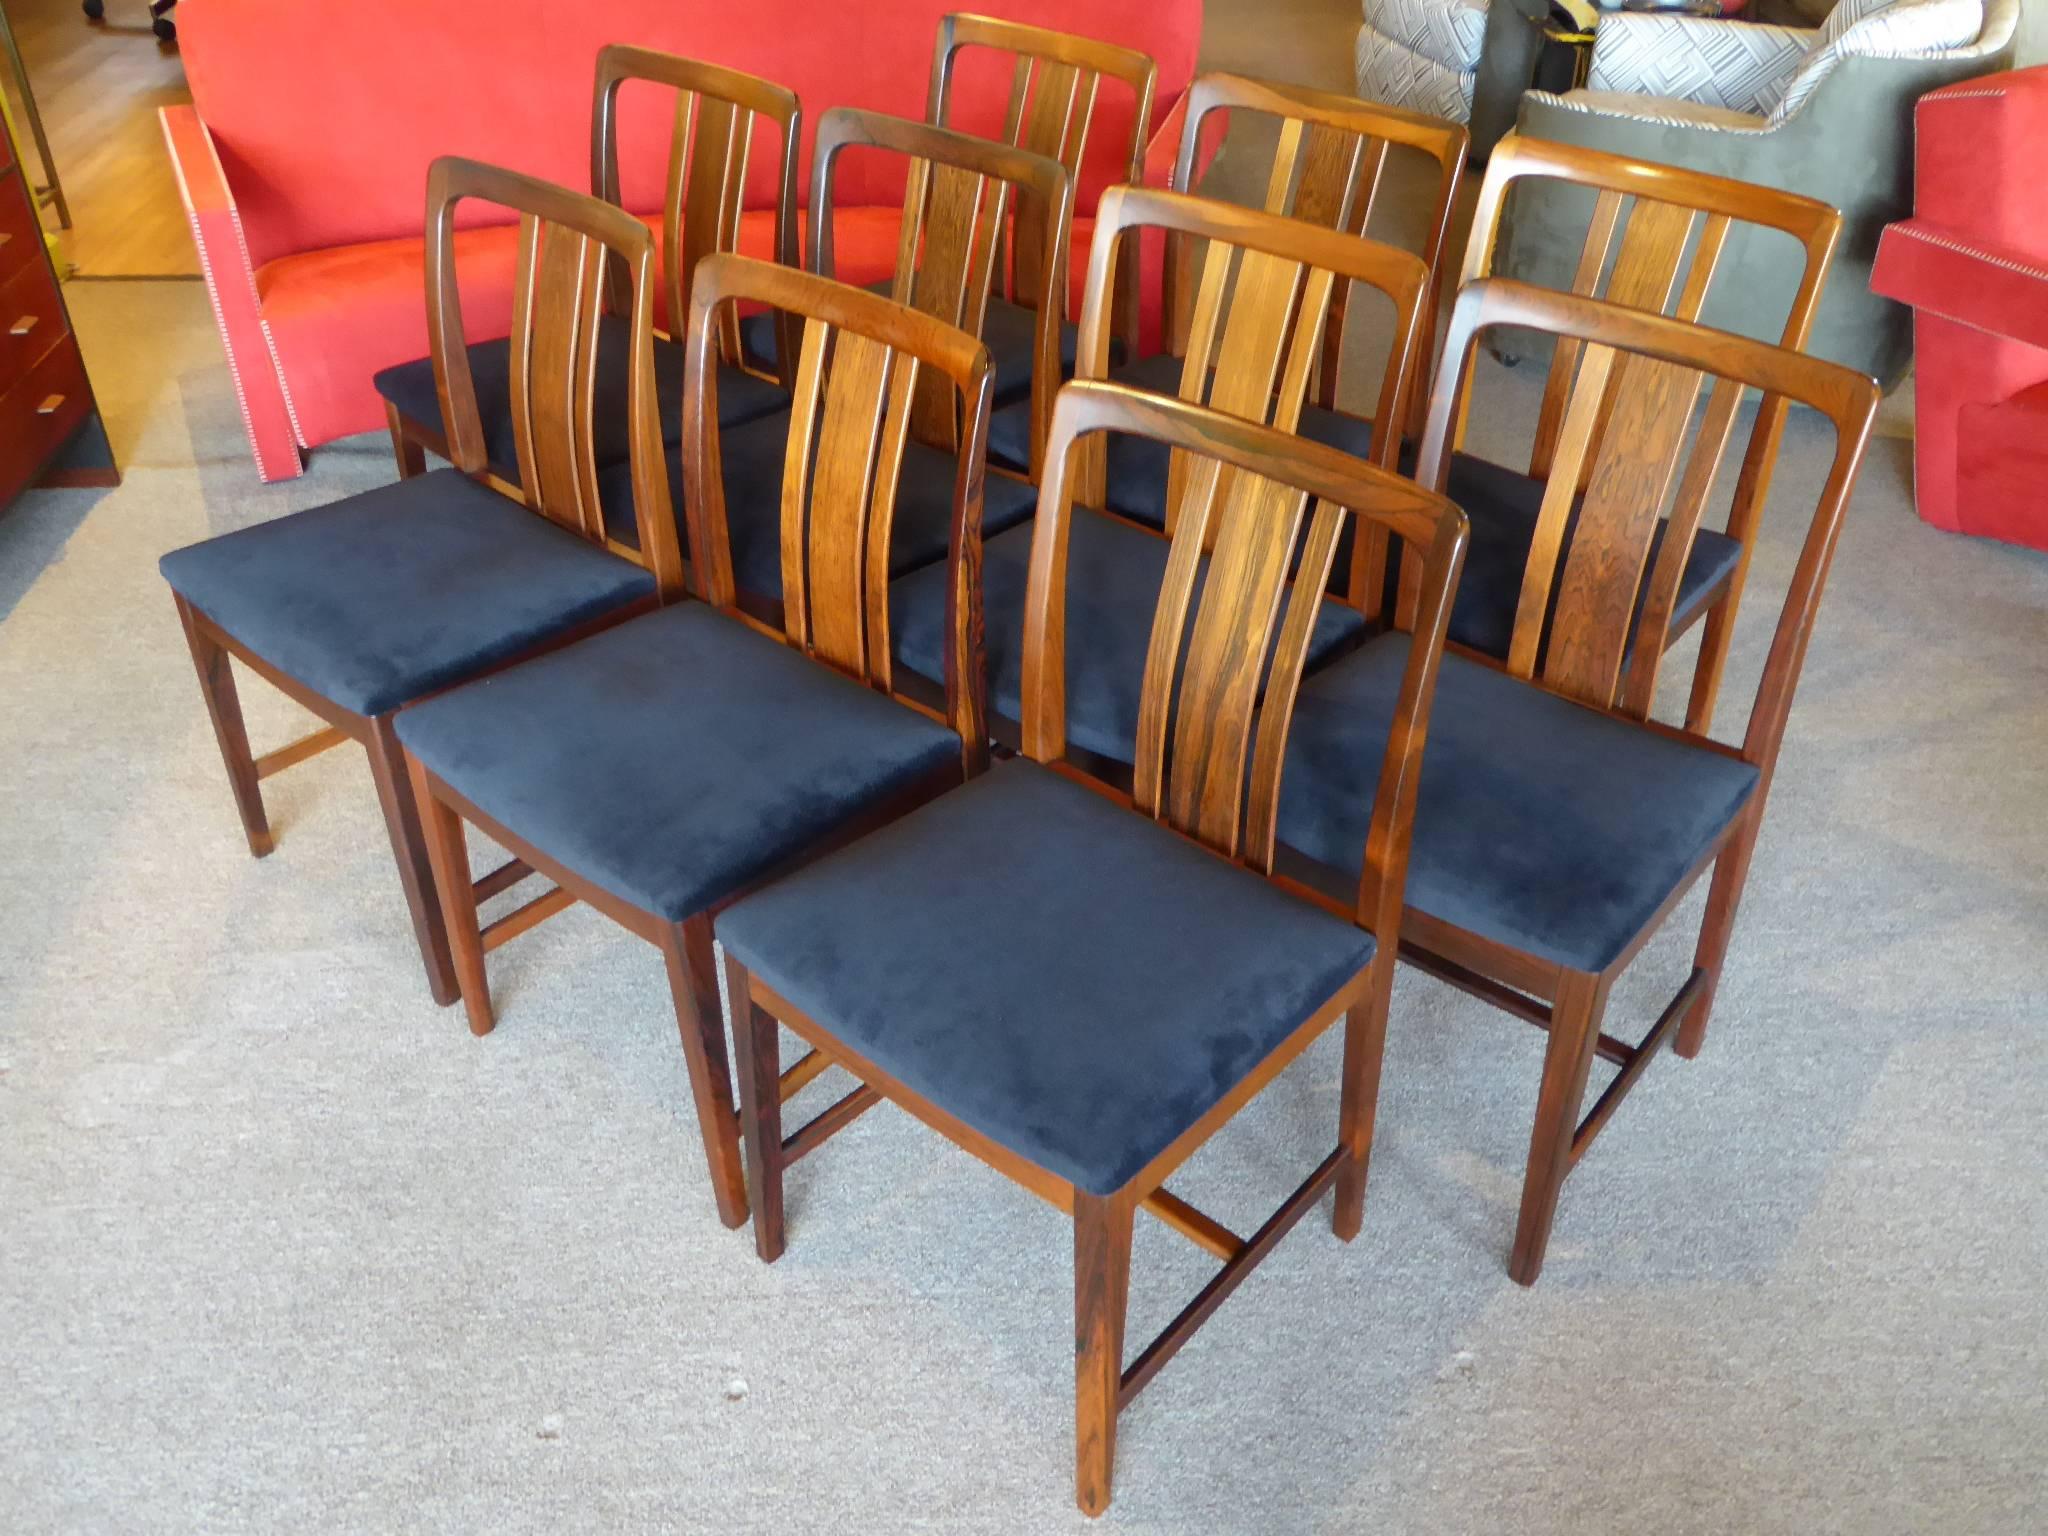 REDUCED FROM $9,500....Exquisite ensemble of ten 1960s rosewood dining chairs by AB Linde Nilsson of Lammhults, Sweden. Exceptional Brazilian highly figured rosewood. High end Swedish mid century craftsmanship and beauty. Curving shaped backs, side